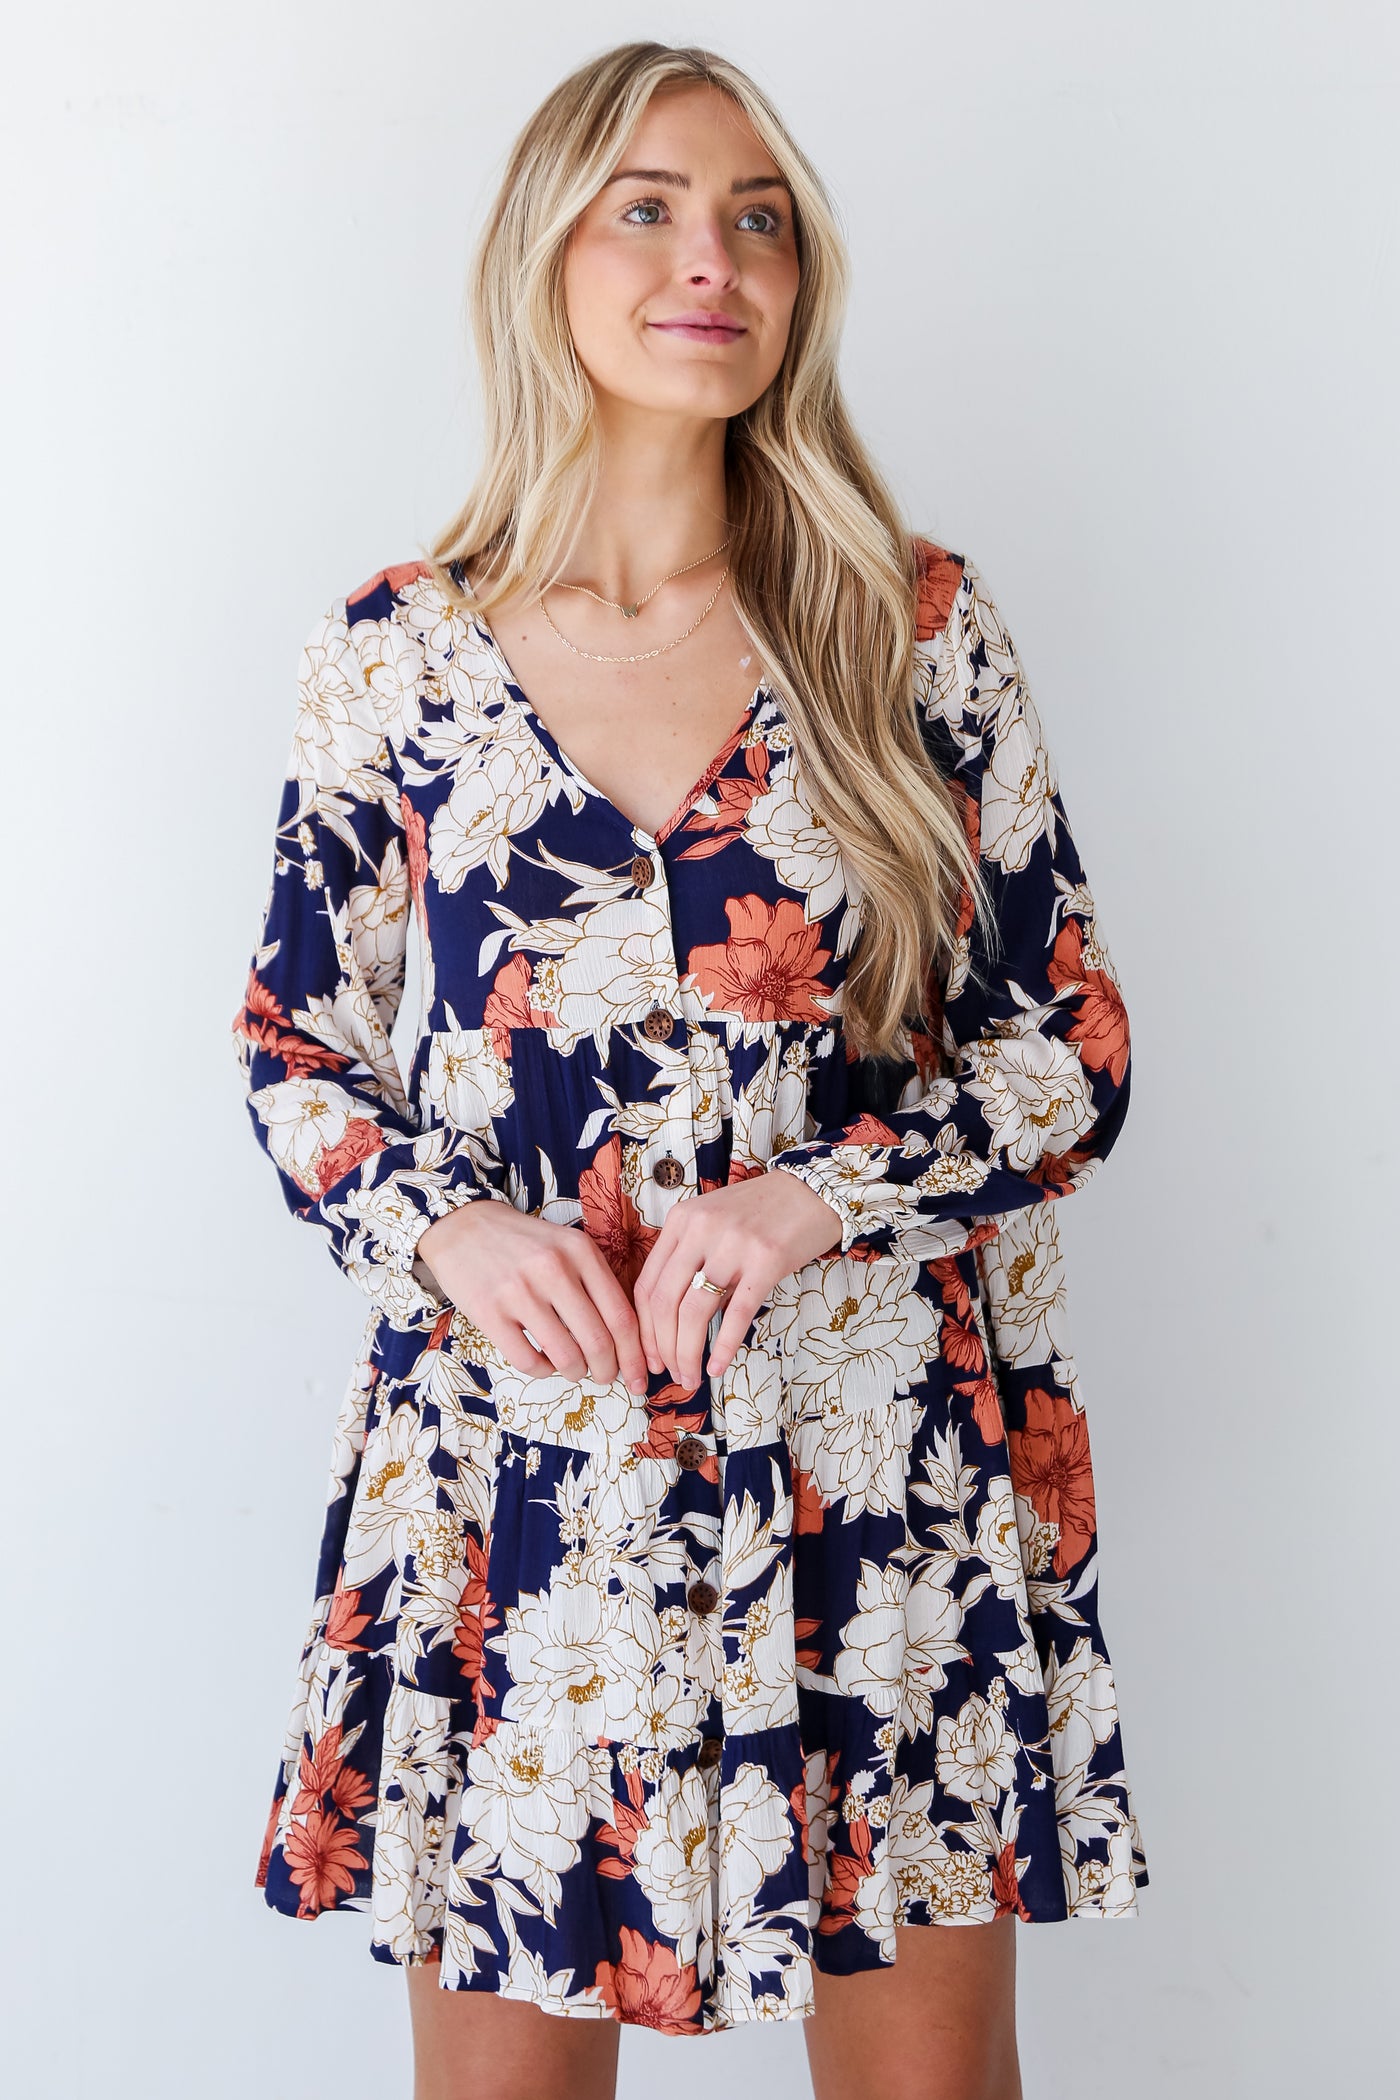 Navy Floral Tiered Mini Dress on model